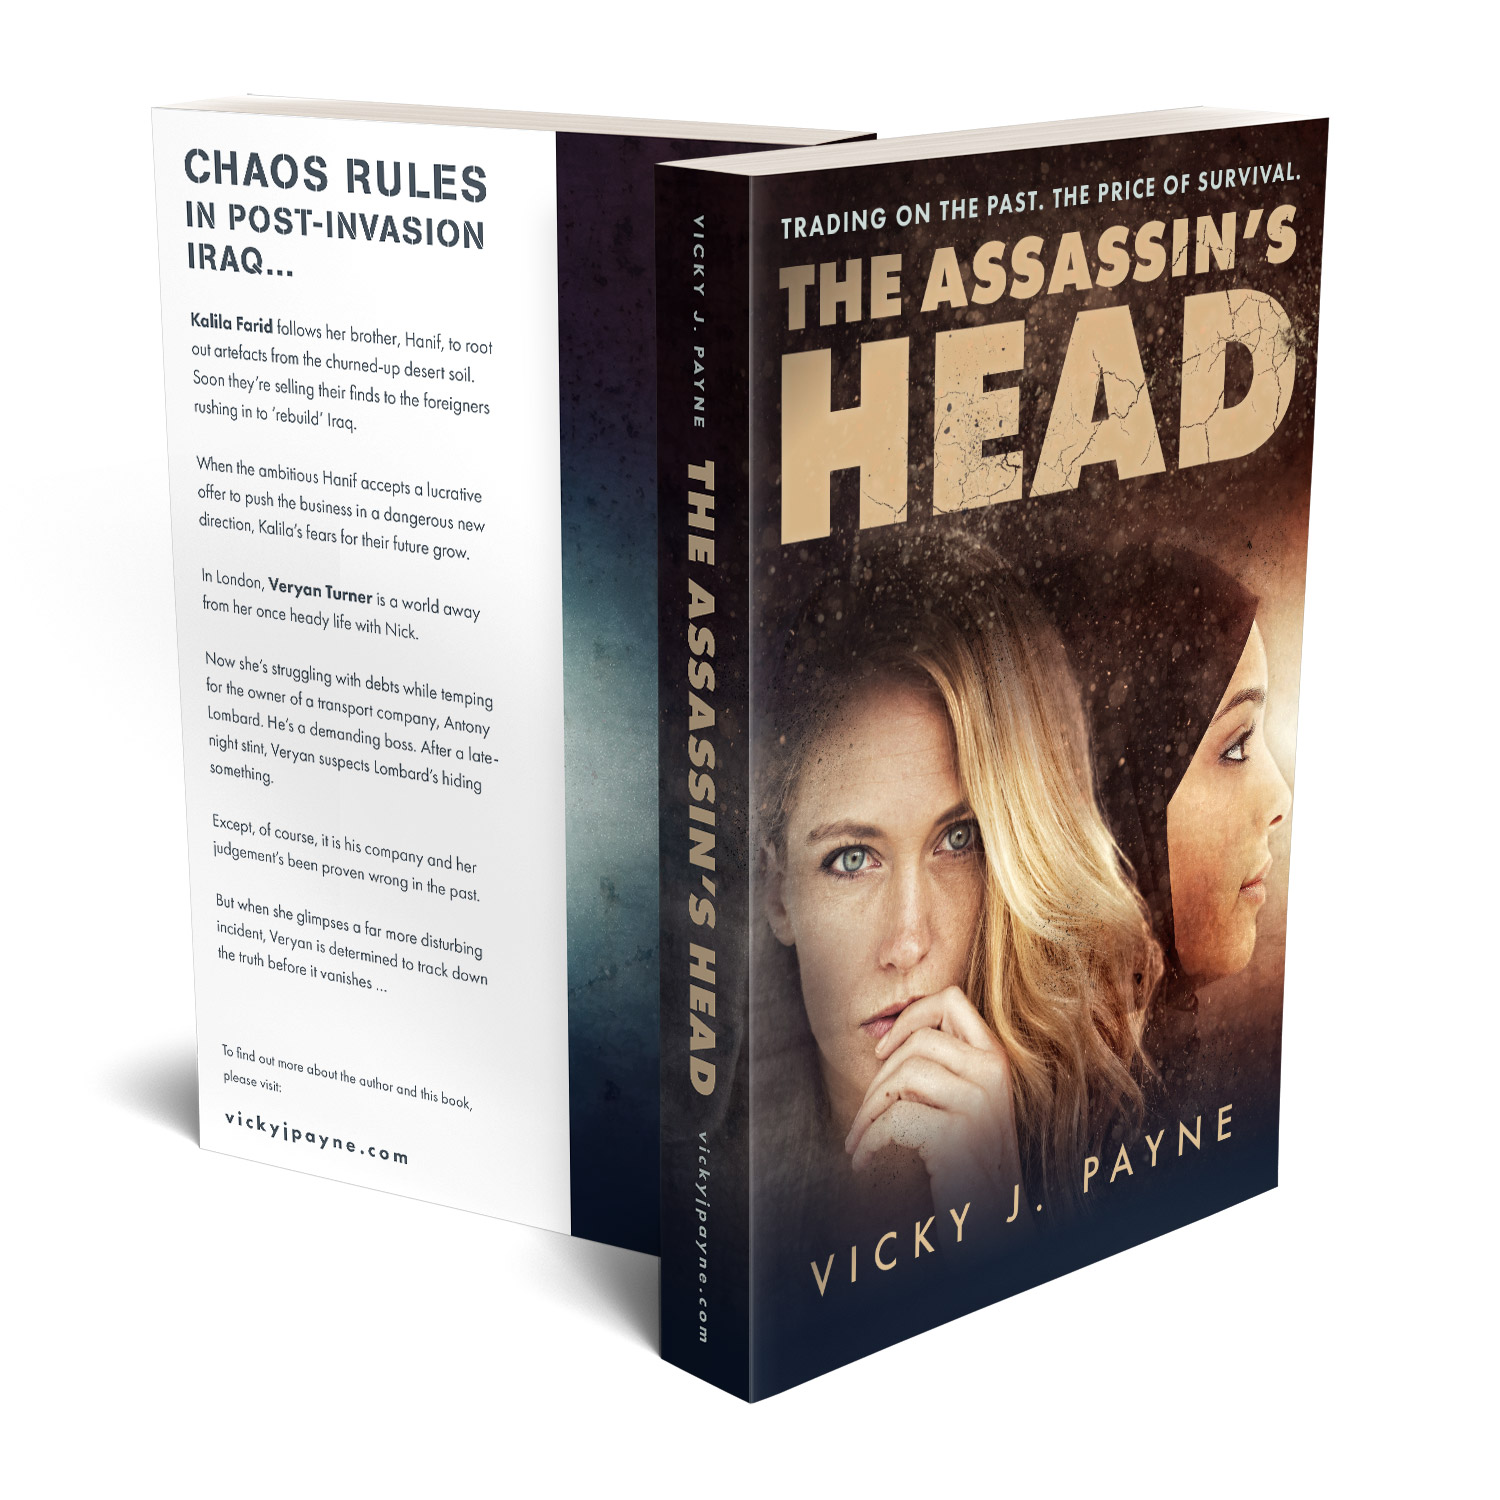 'The Assassin's Head' is a terrific female-led thriller, set in the aftermath of the 2003 Iraq War. The author is Vicky J. Ward. The book cover design and interior formatting are by Mark Thomas. To learn more about what Mark could do for your book, please visit coverness.com.